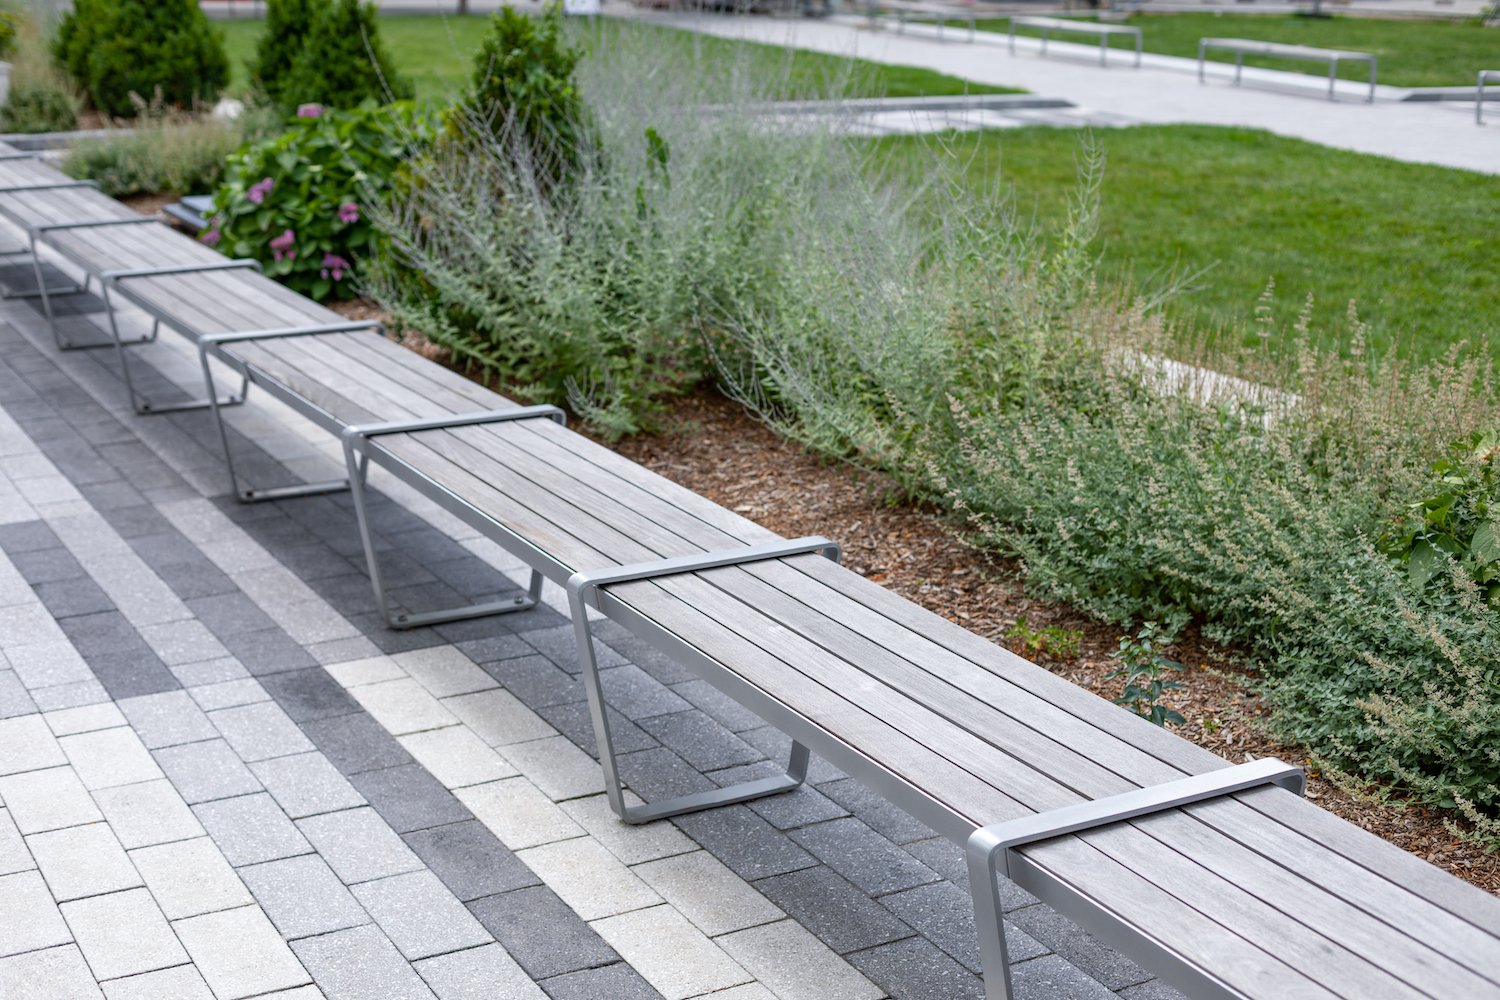 bench-commercial-landscaping-path-pavers-1